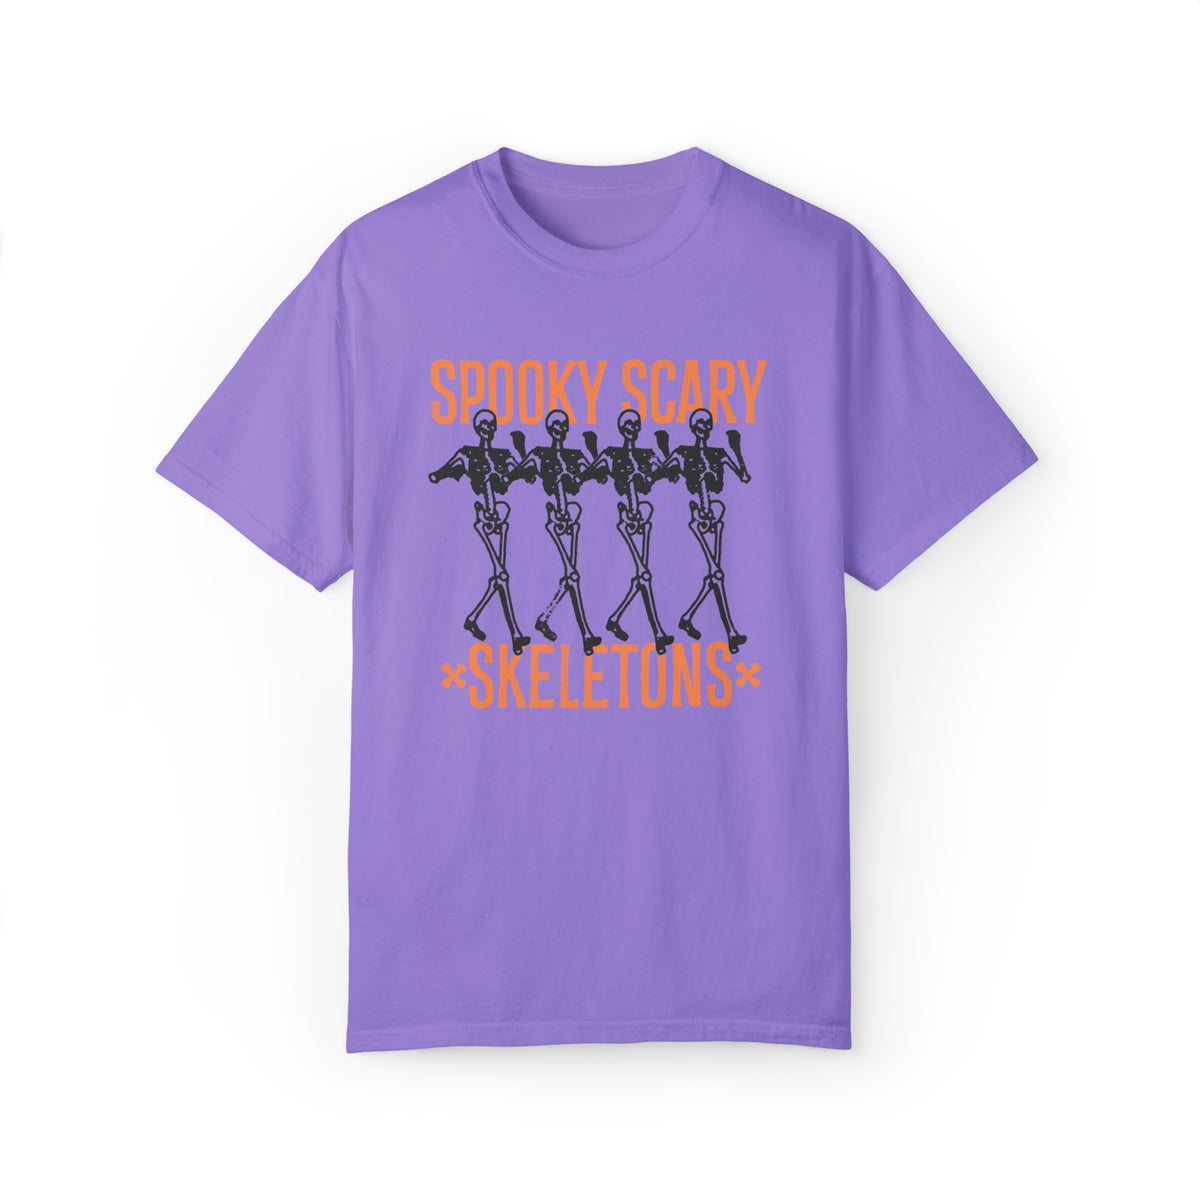 Spooky Scary Skeletons Comfort Colors Unisex Garment-Dyed T-shirt